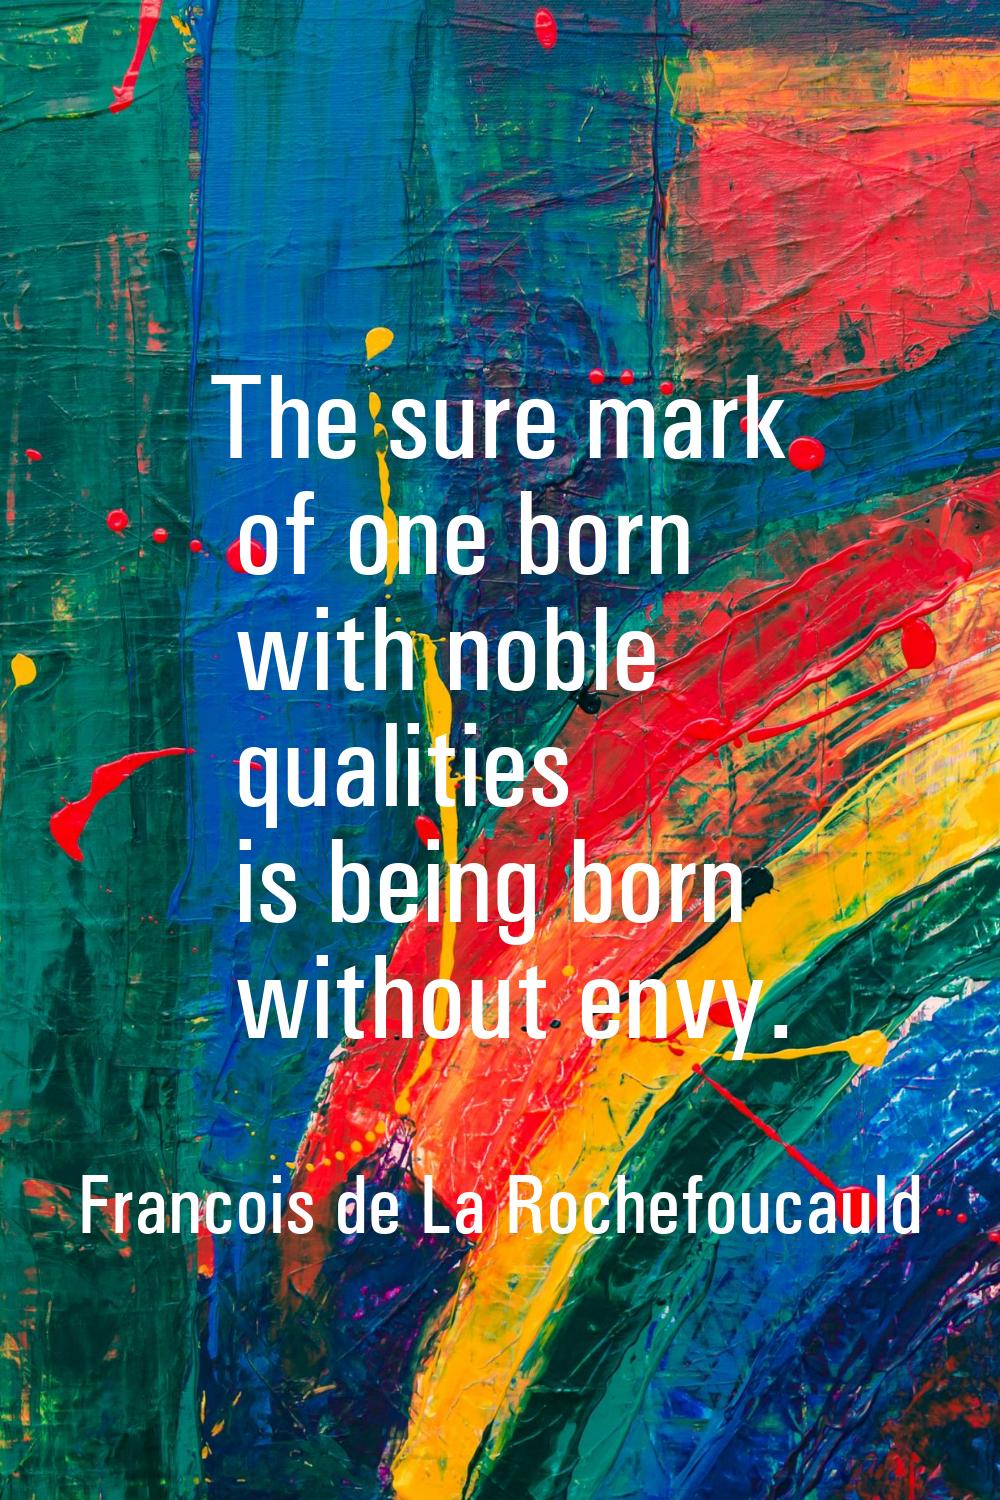 The sure mark of one born with noble qualities is being born without envy.